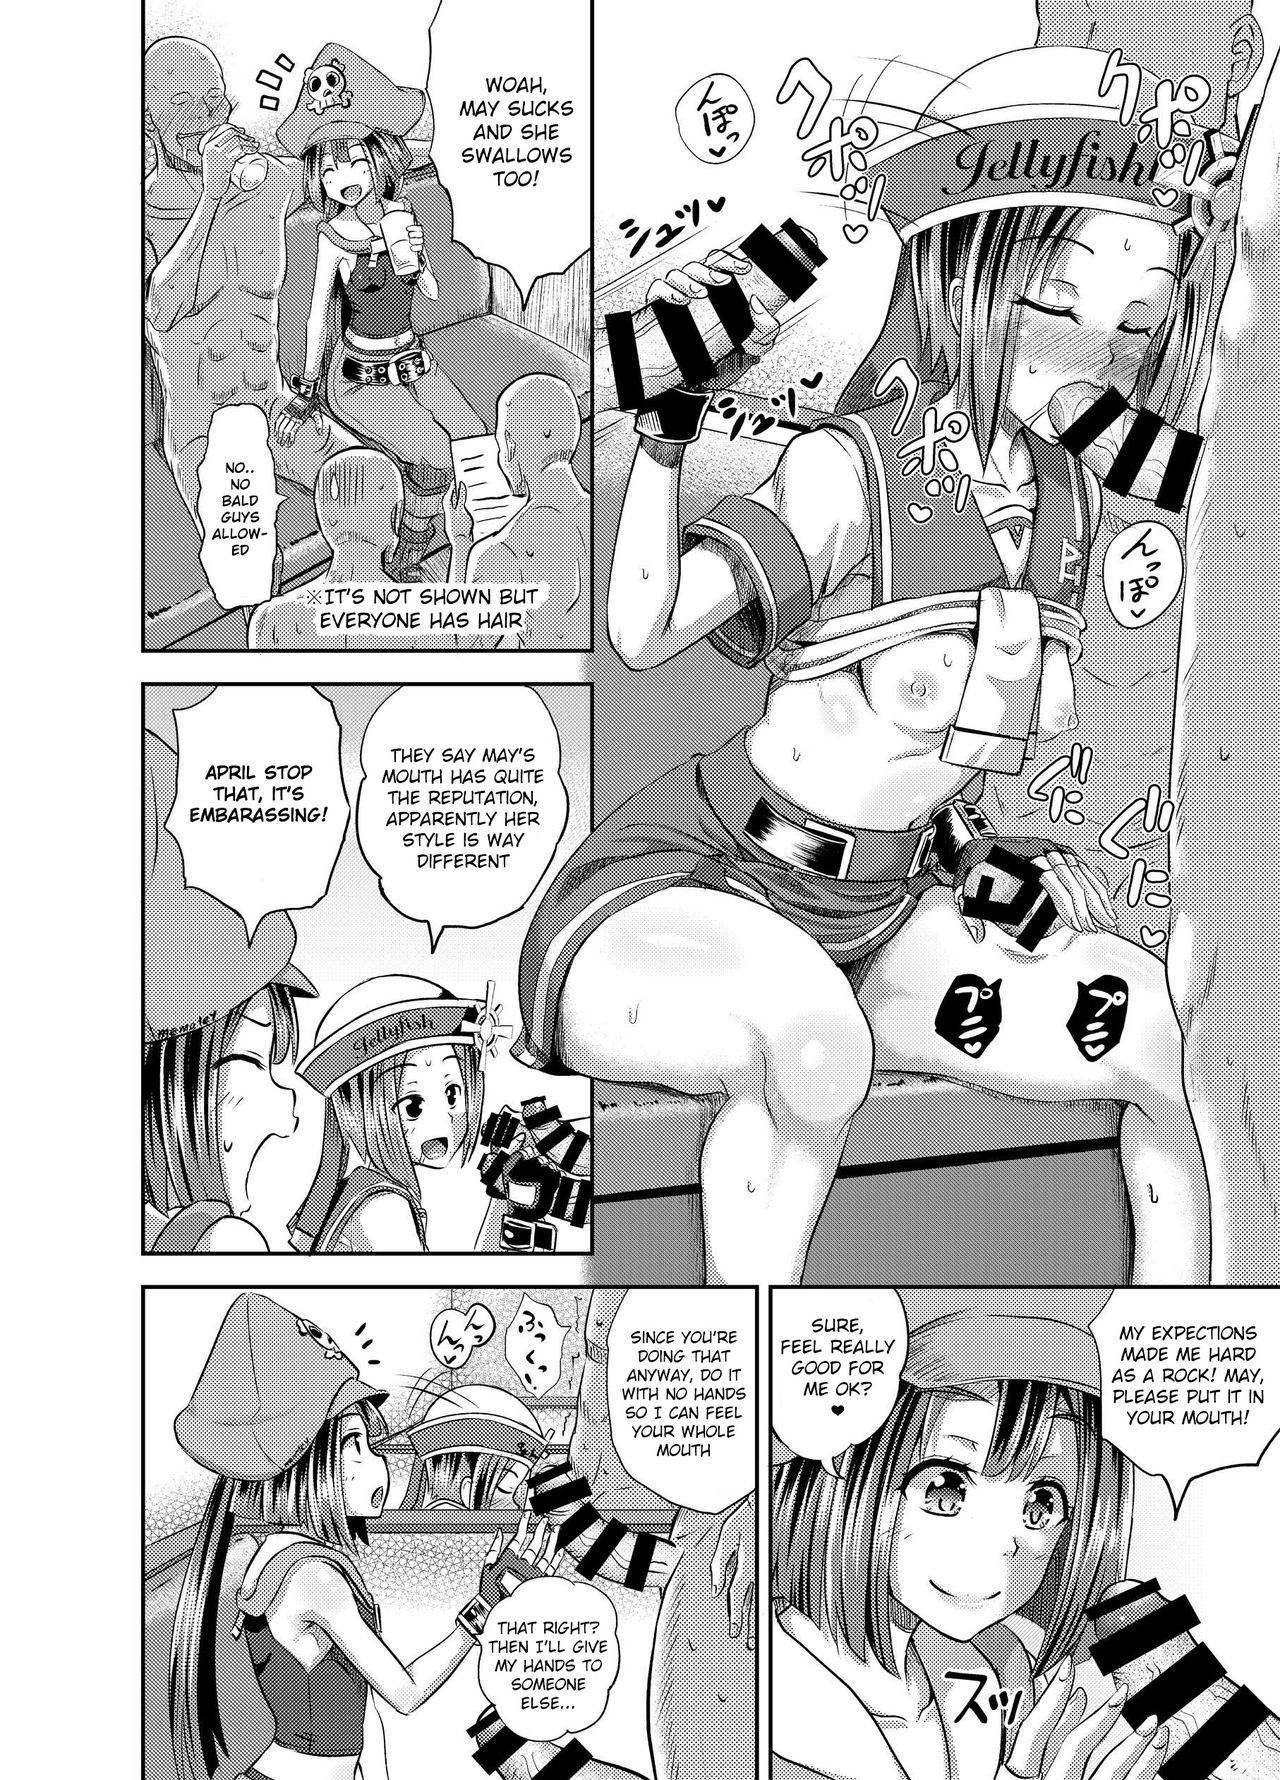 Telugu Jellyfish Kaizokudan e Youkoso! | Welcome to The Jellyfish Pleasure Club! - Guilty gear Sex Pussy - Page 5